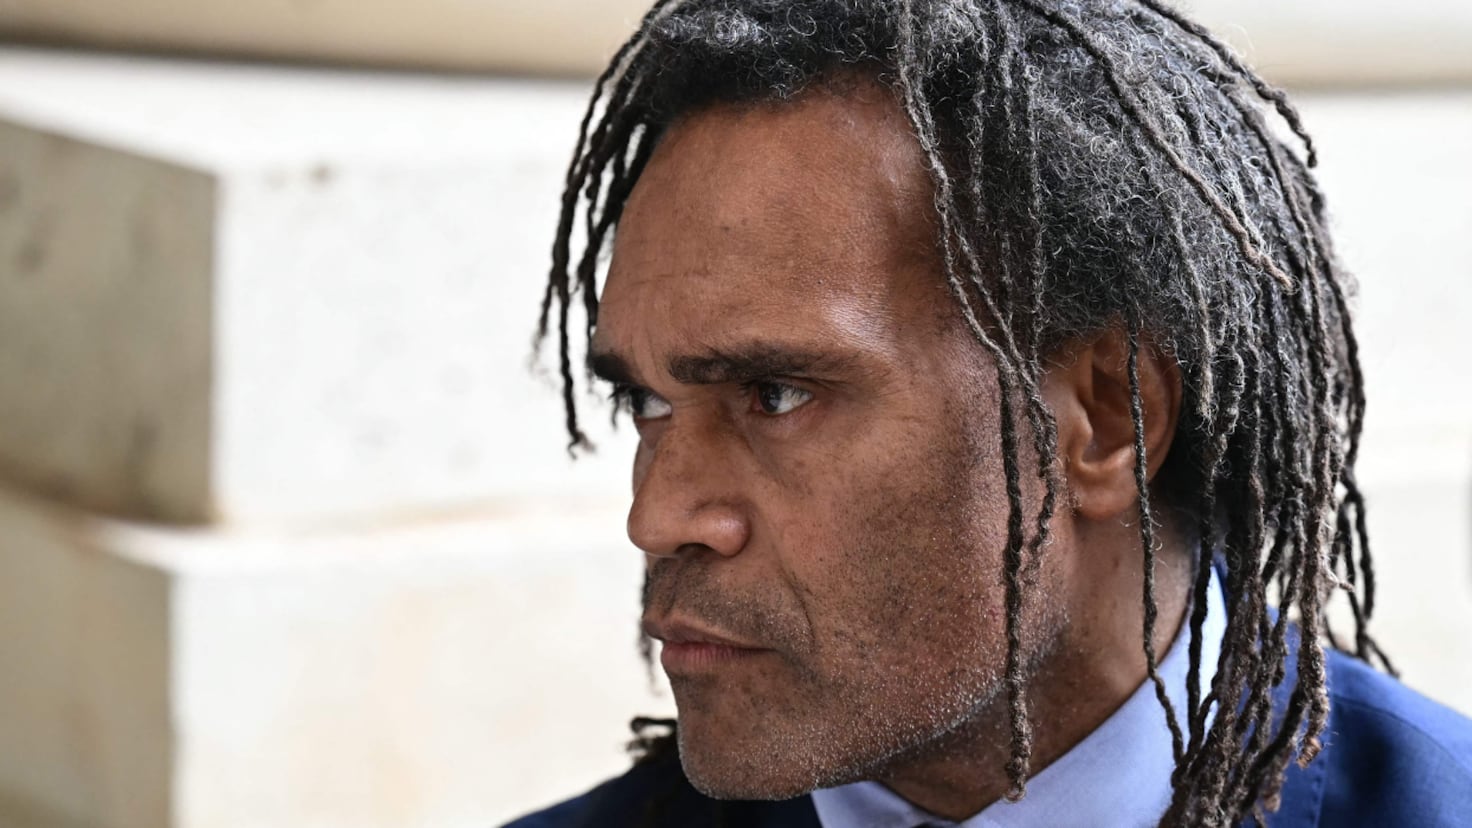 Karembeu's hell in his hometown: Two relatives have been shot in the head
